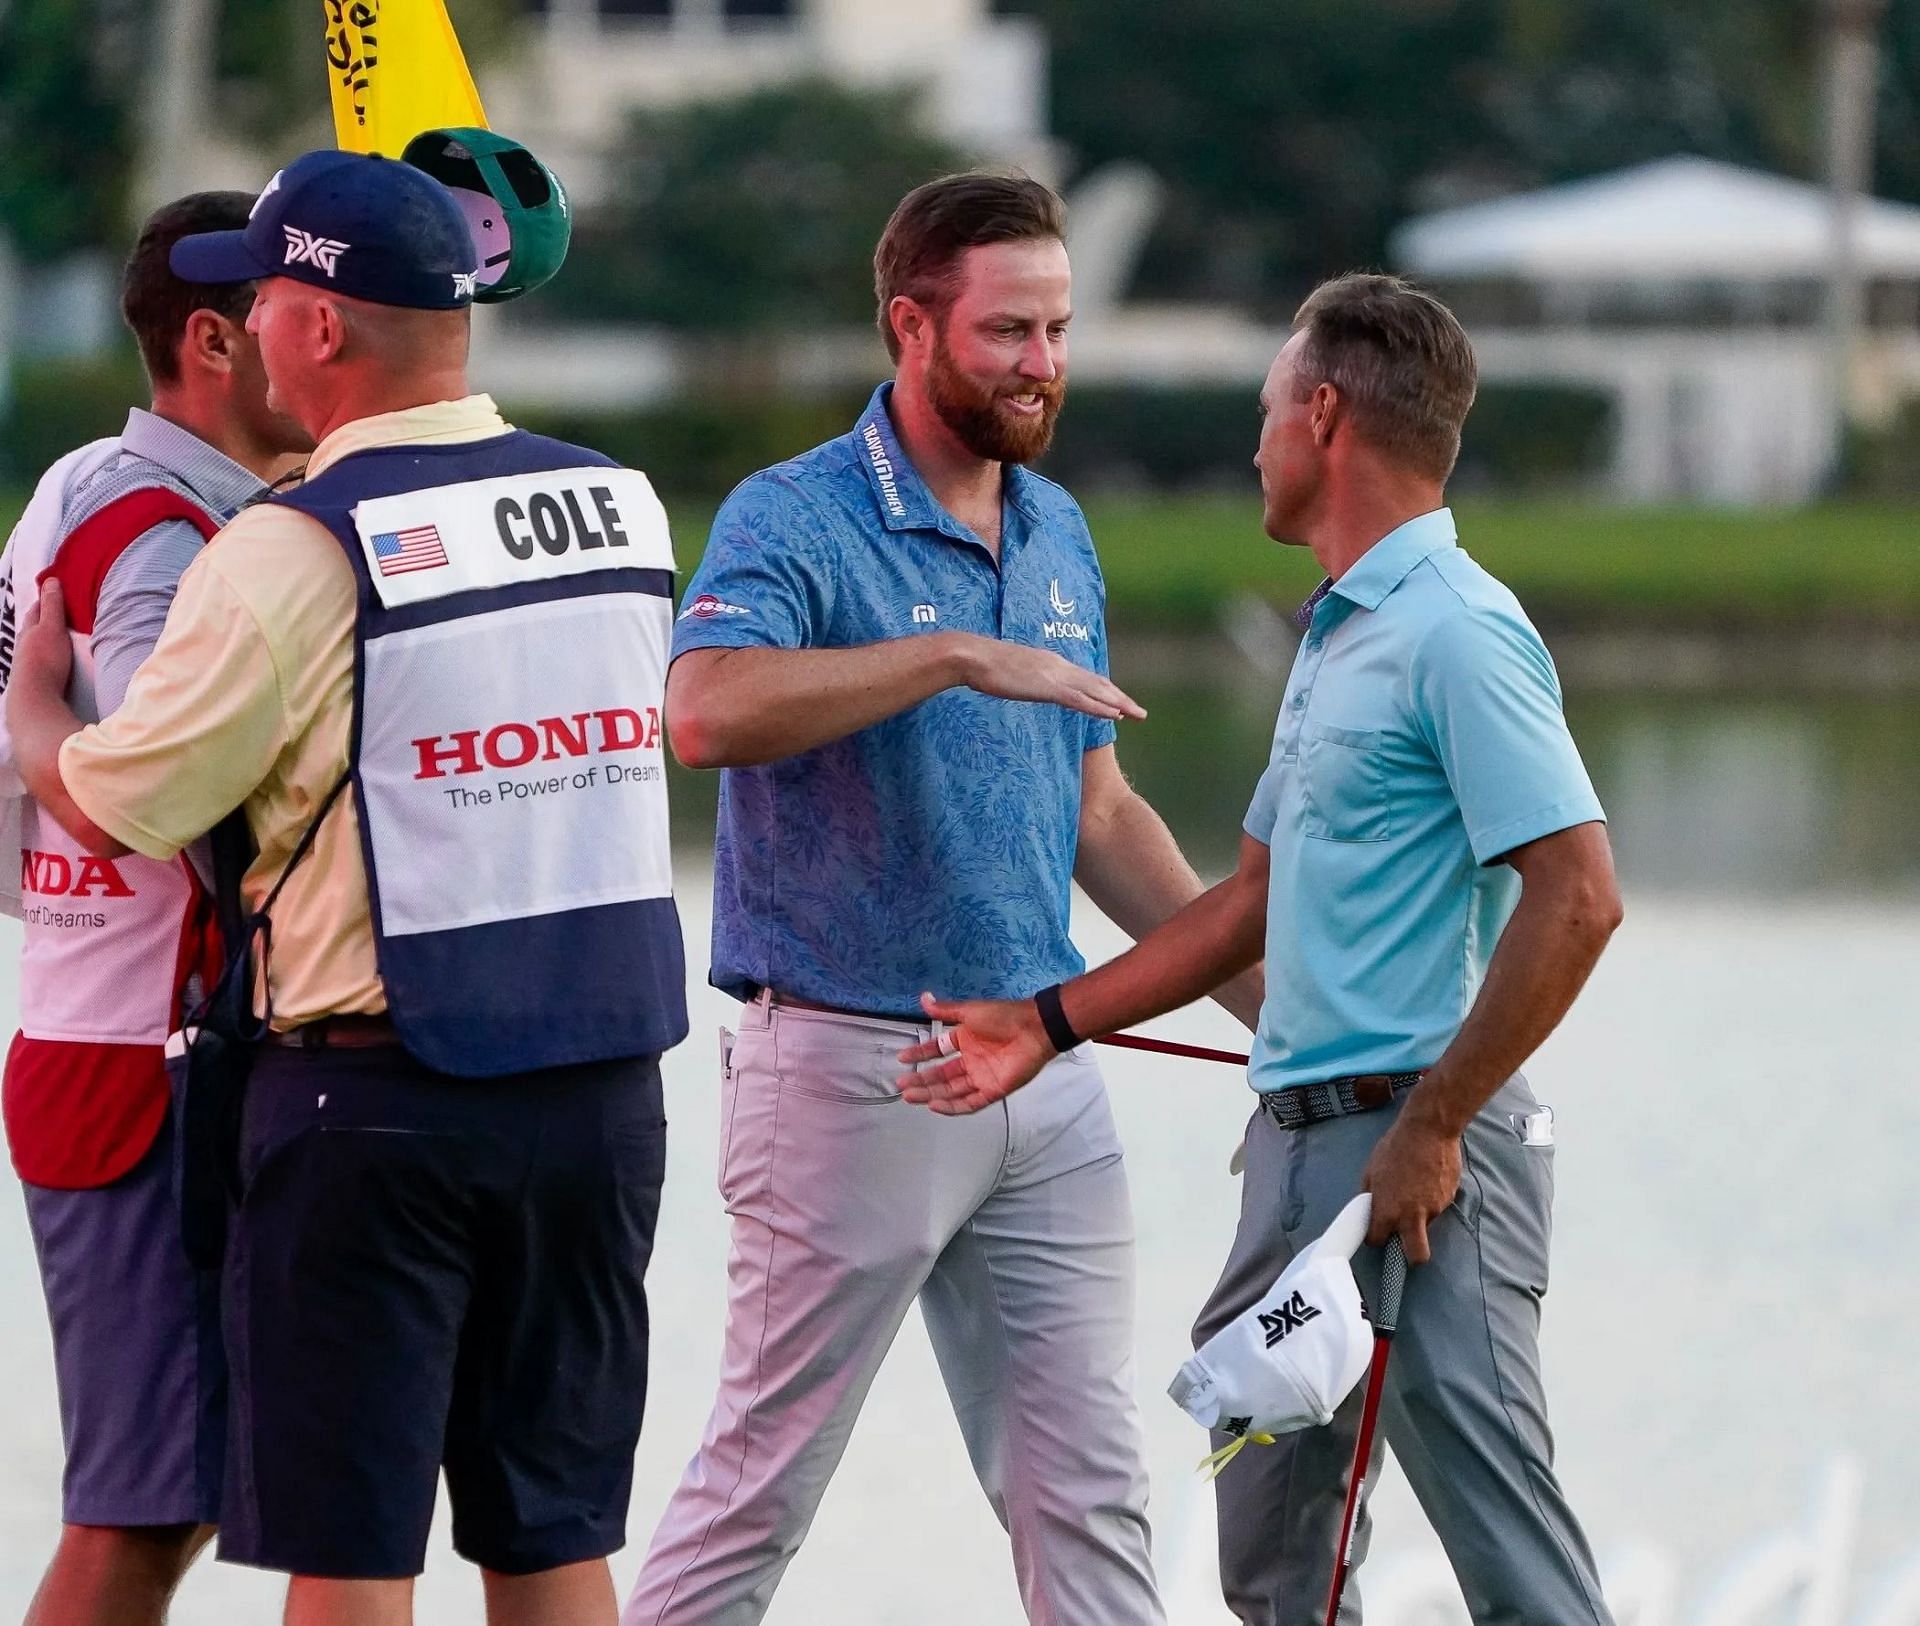 Chris Kirk and Eric Cole were tied after four rounds of golf at the Honda Classic